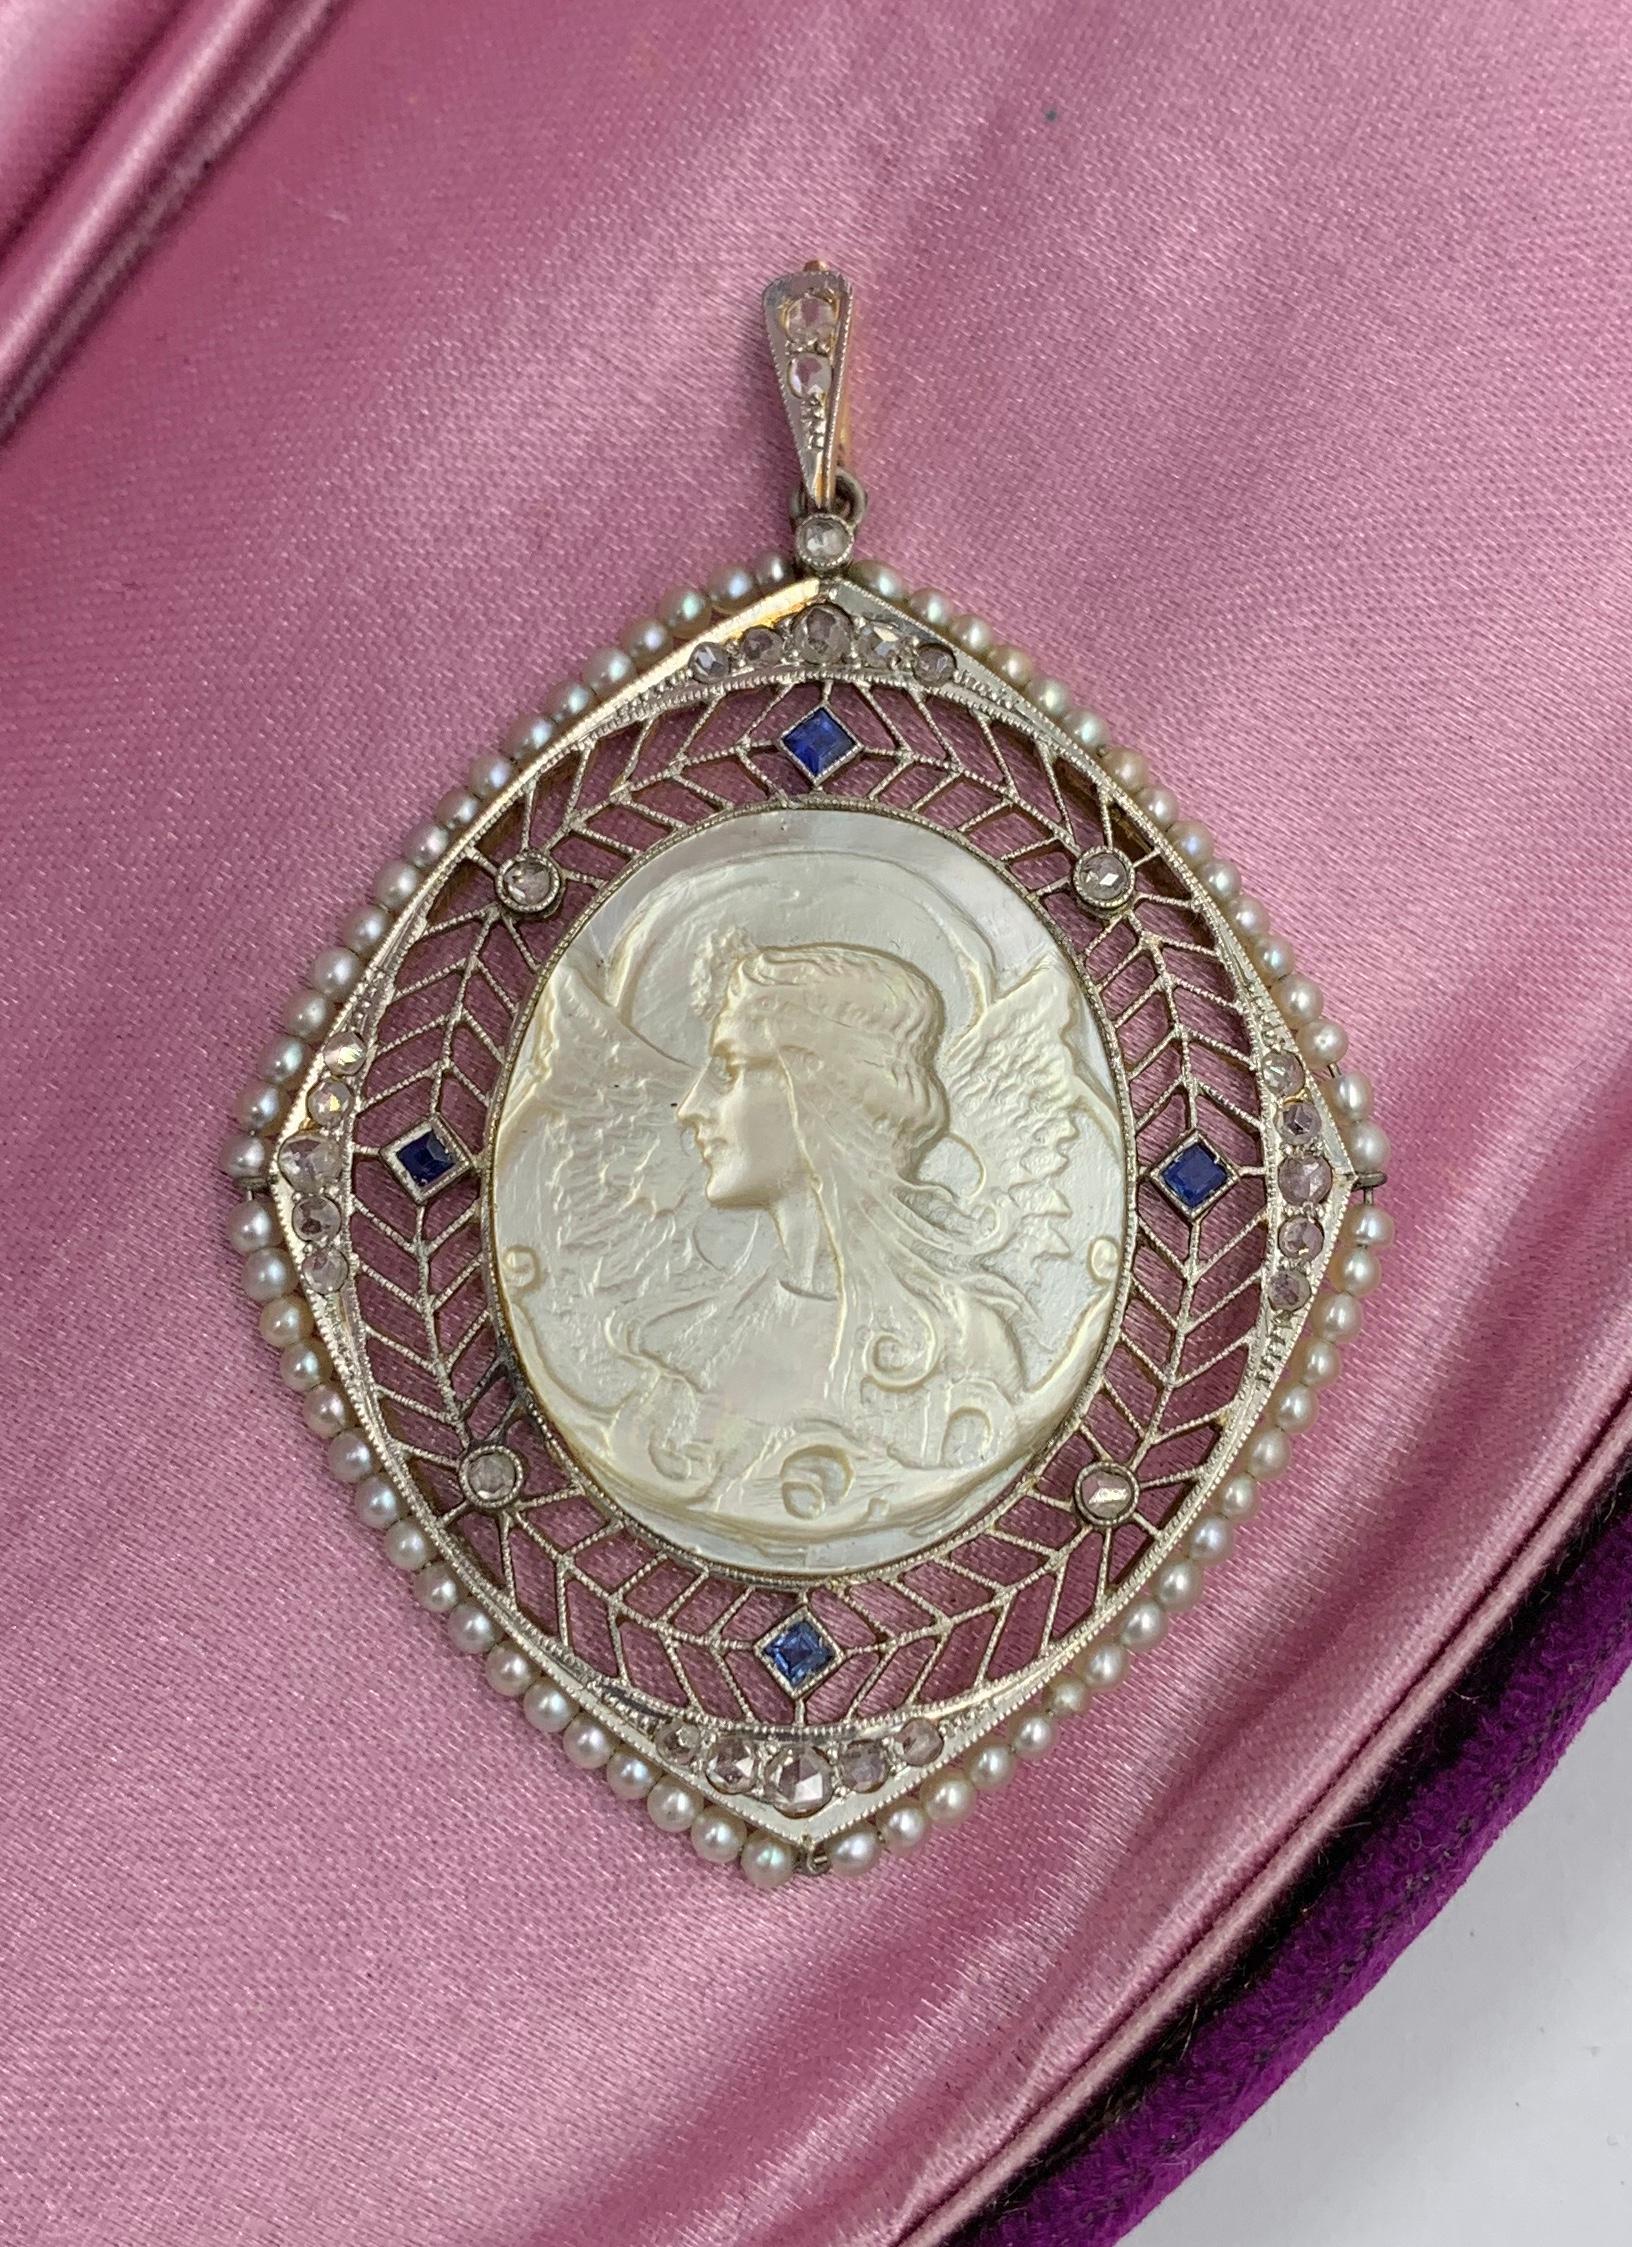 The extraordinary Sapphire, Rose Cut Diamond, Platinum Pendant with the image of a winged Fairy or Angel is a Museum Quality Jewel.  The Belle Epoque - Art Deco pendant is centered by the extraordinary carved Mother of Pearl medallion with an image